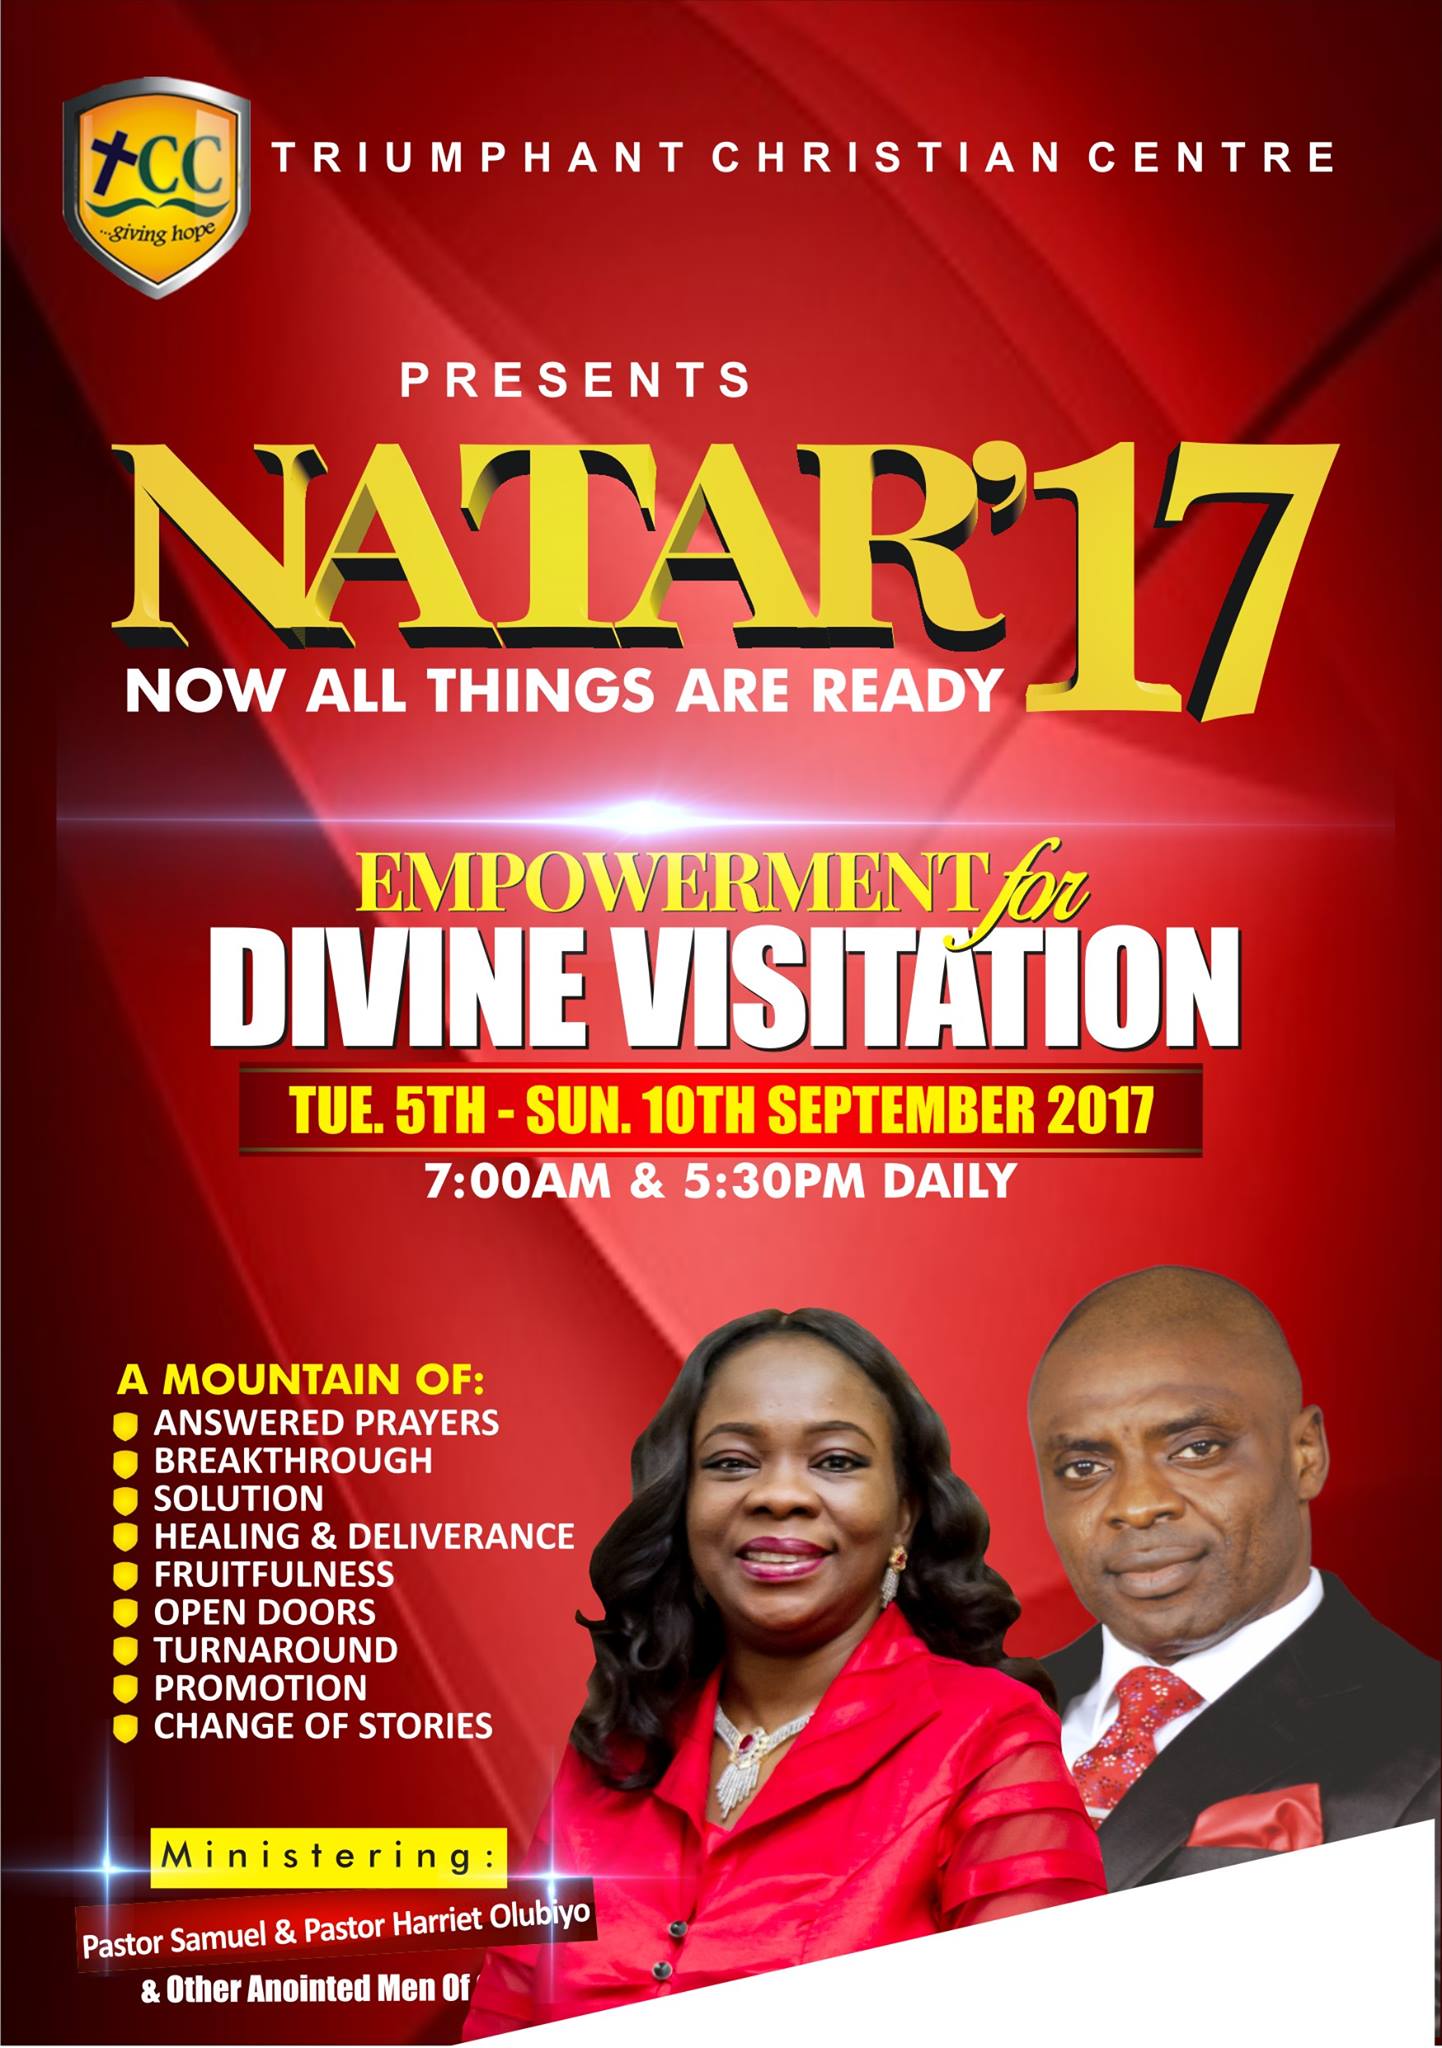 NATAR 17 - Now All Things Are Ready